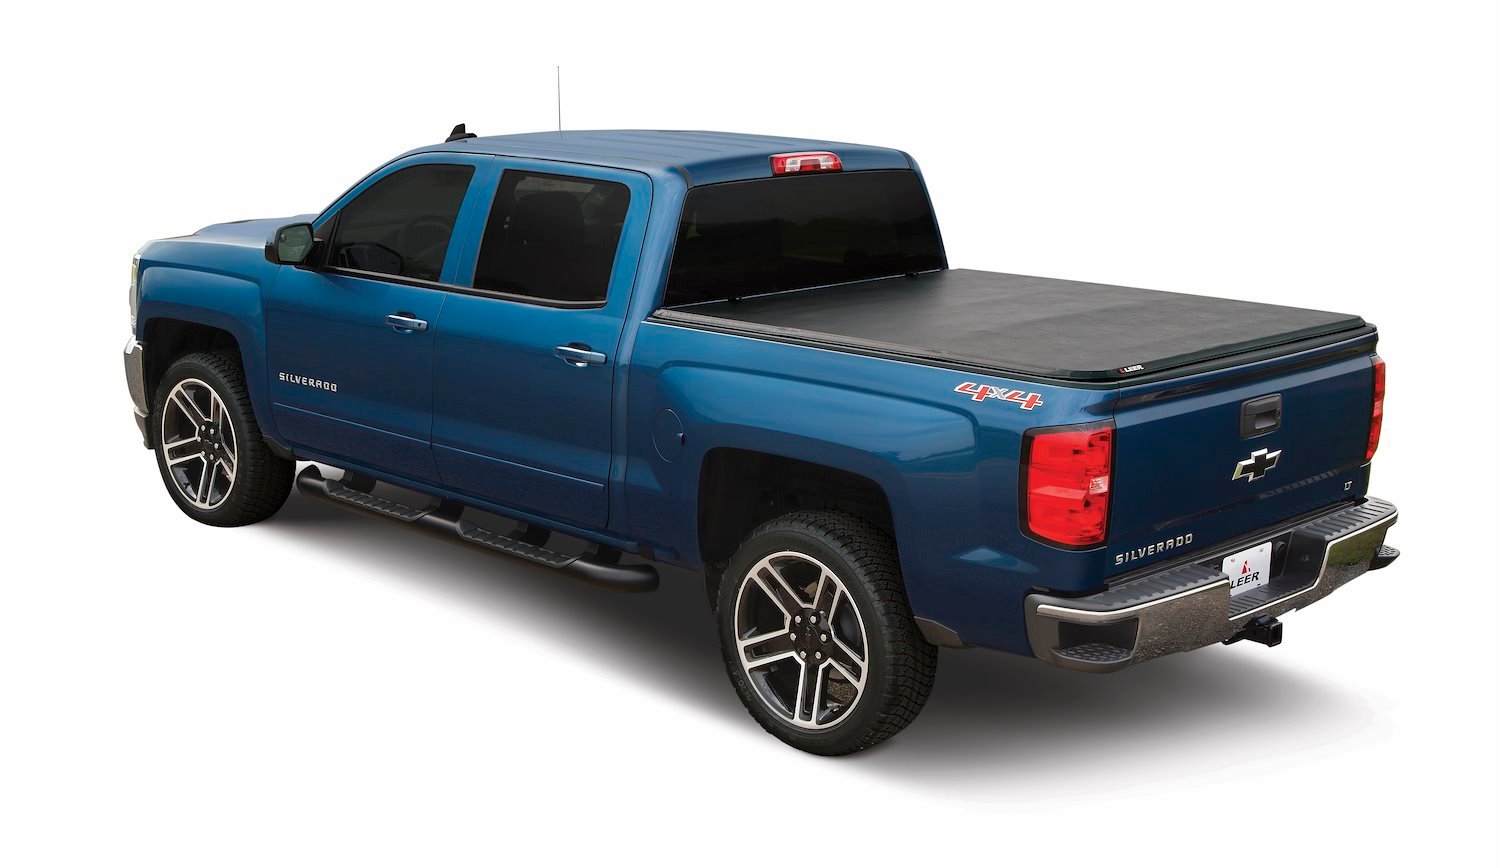 Latitude Soft Folding Tonneau Cover Fits Select Ram 1500, 2500, 3500 [Bed Length: 6 ft. 4 in.]